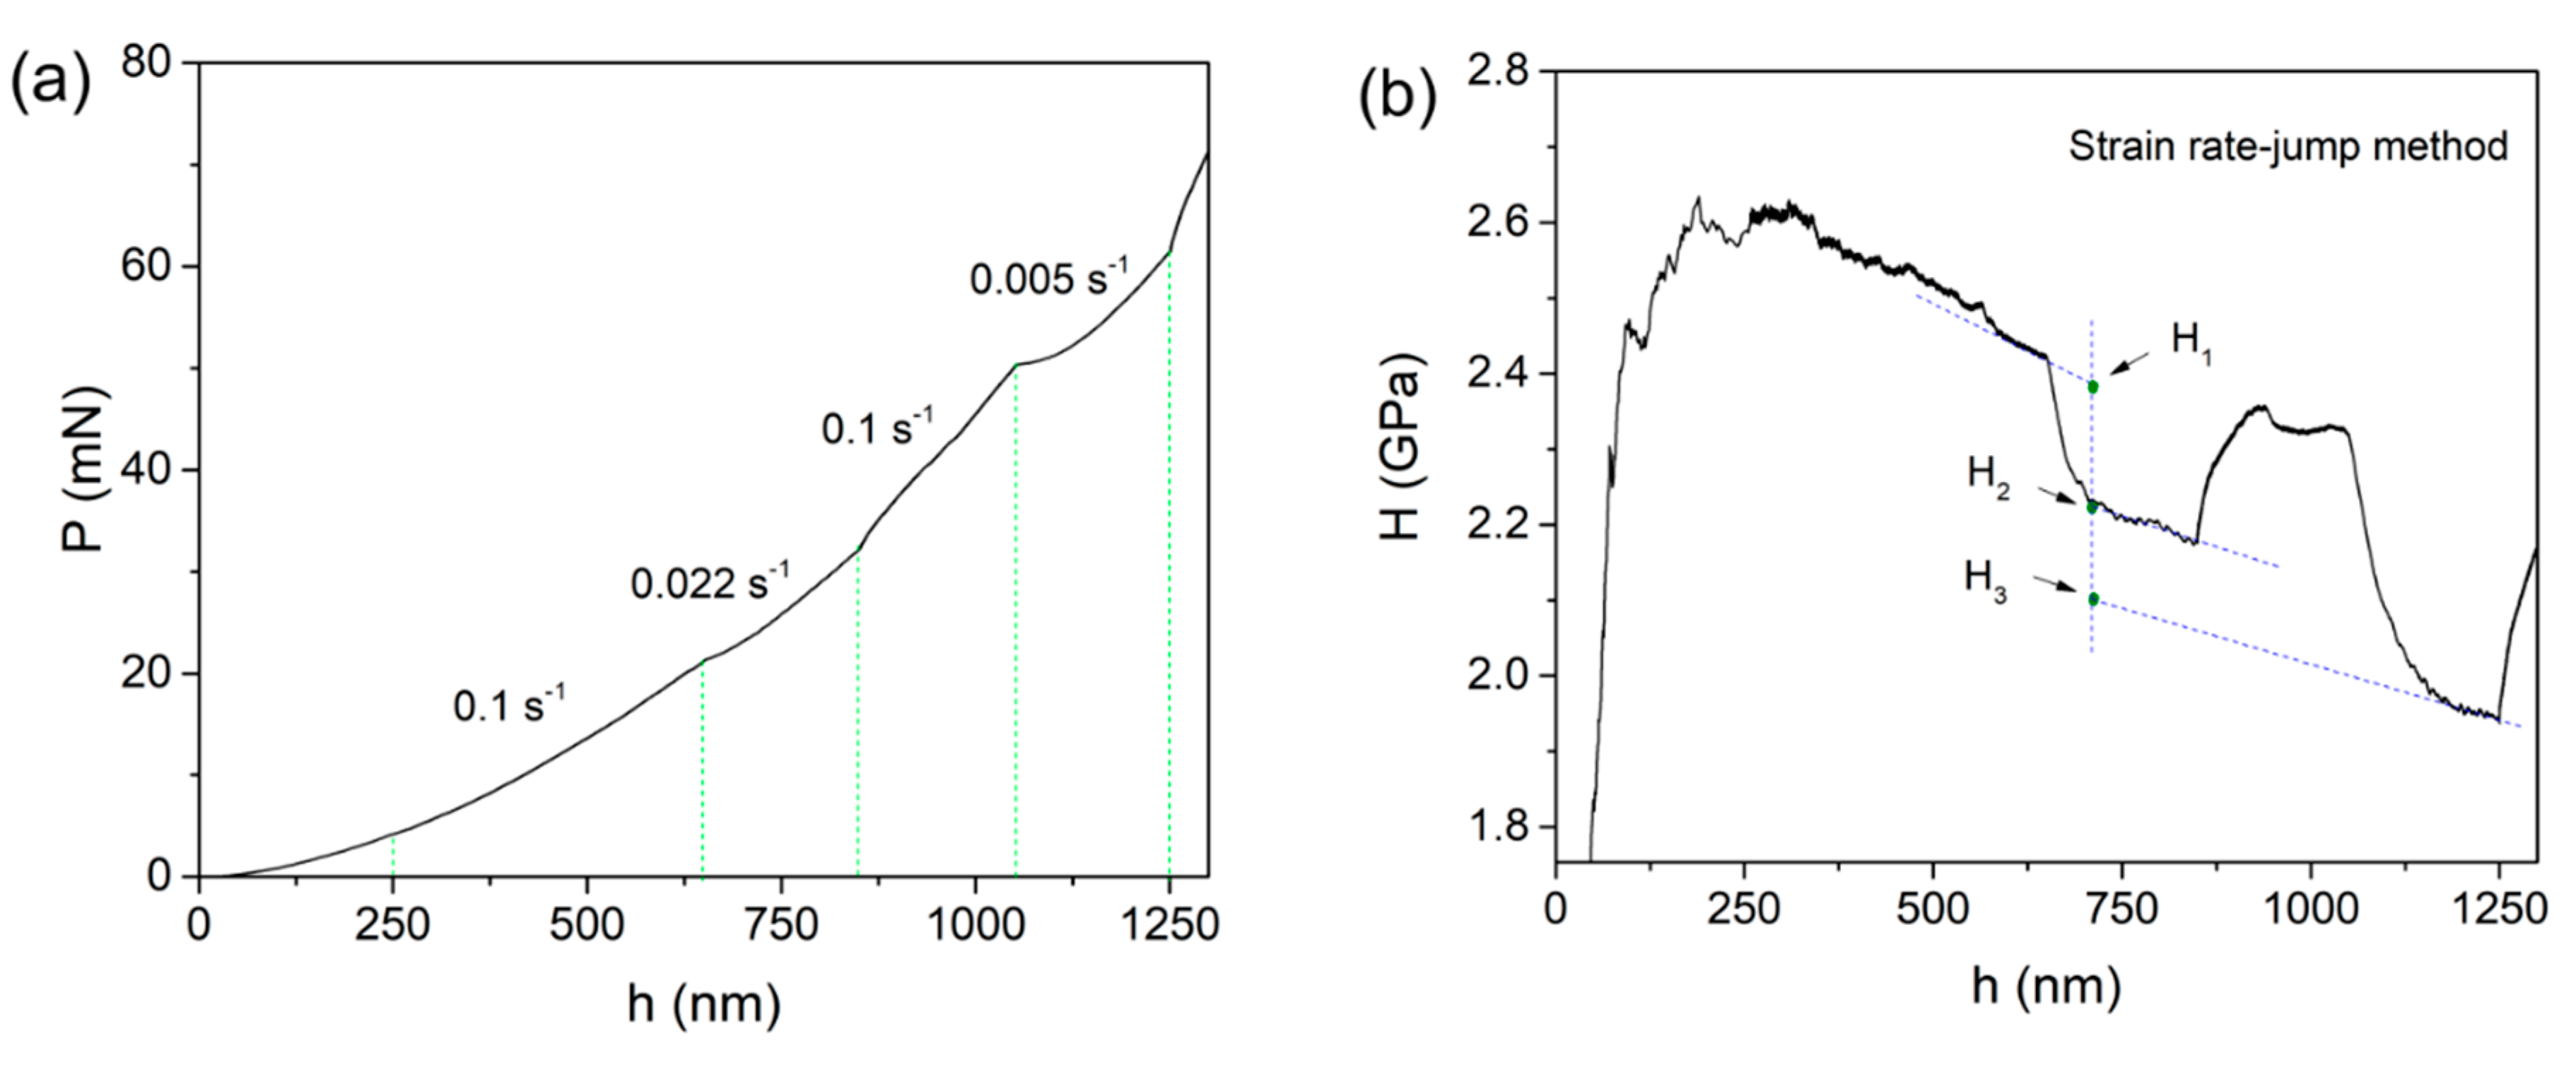 Micromachines Free Full Text The Strain Rate Sensitivity And Creep Behavior For The Tripler Plane Of Potassium Dihydrogen Phosphate Crystal By Nanoindentation Html